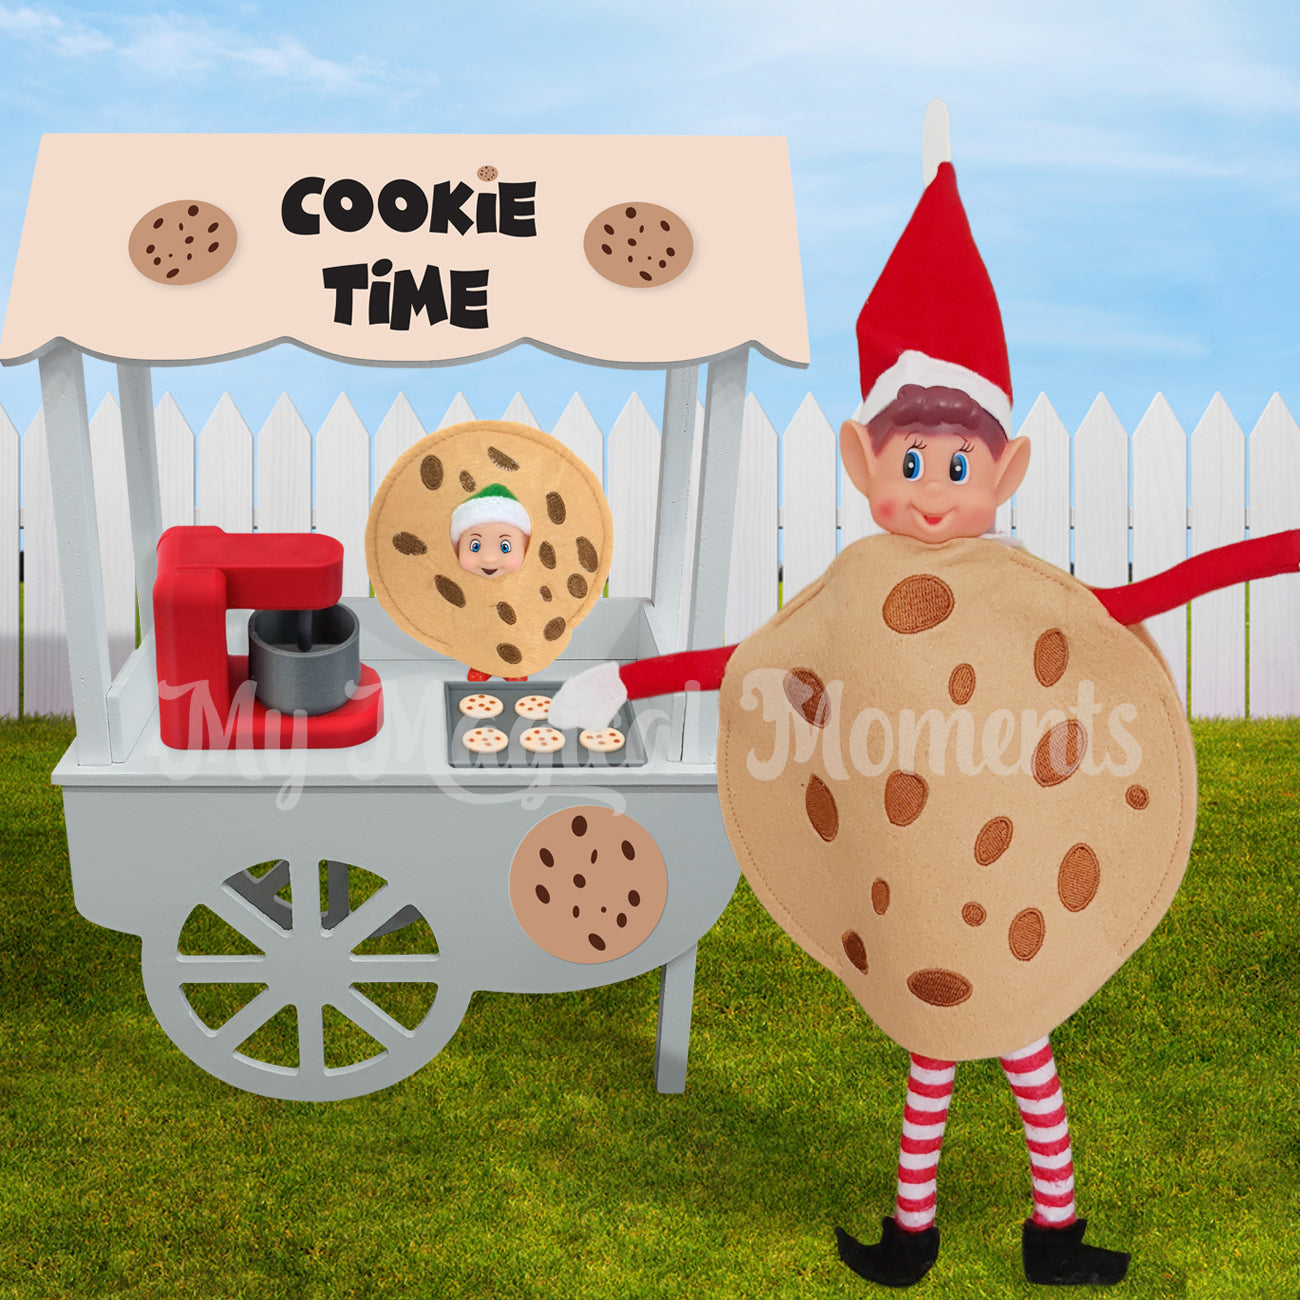 Elves behavin badly dressed as a cookie With a baby cookie selling baked goods